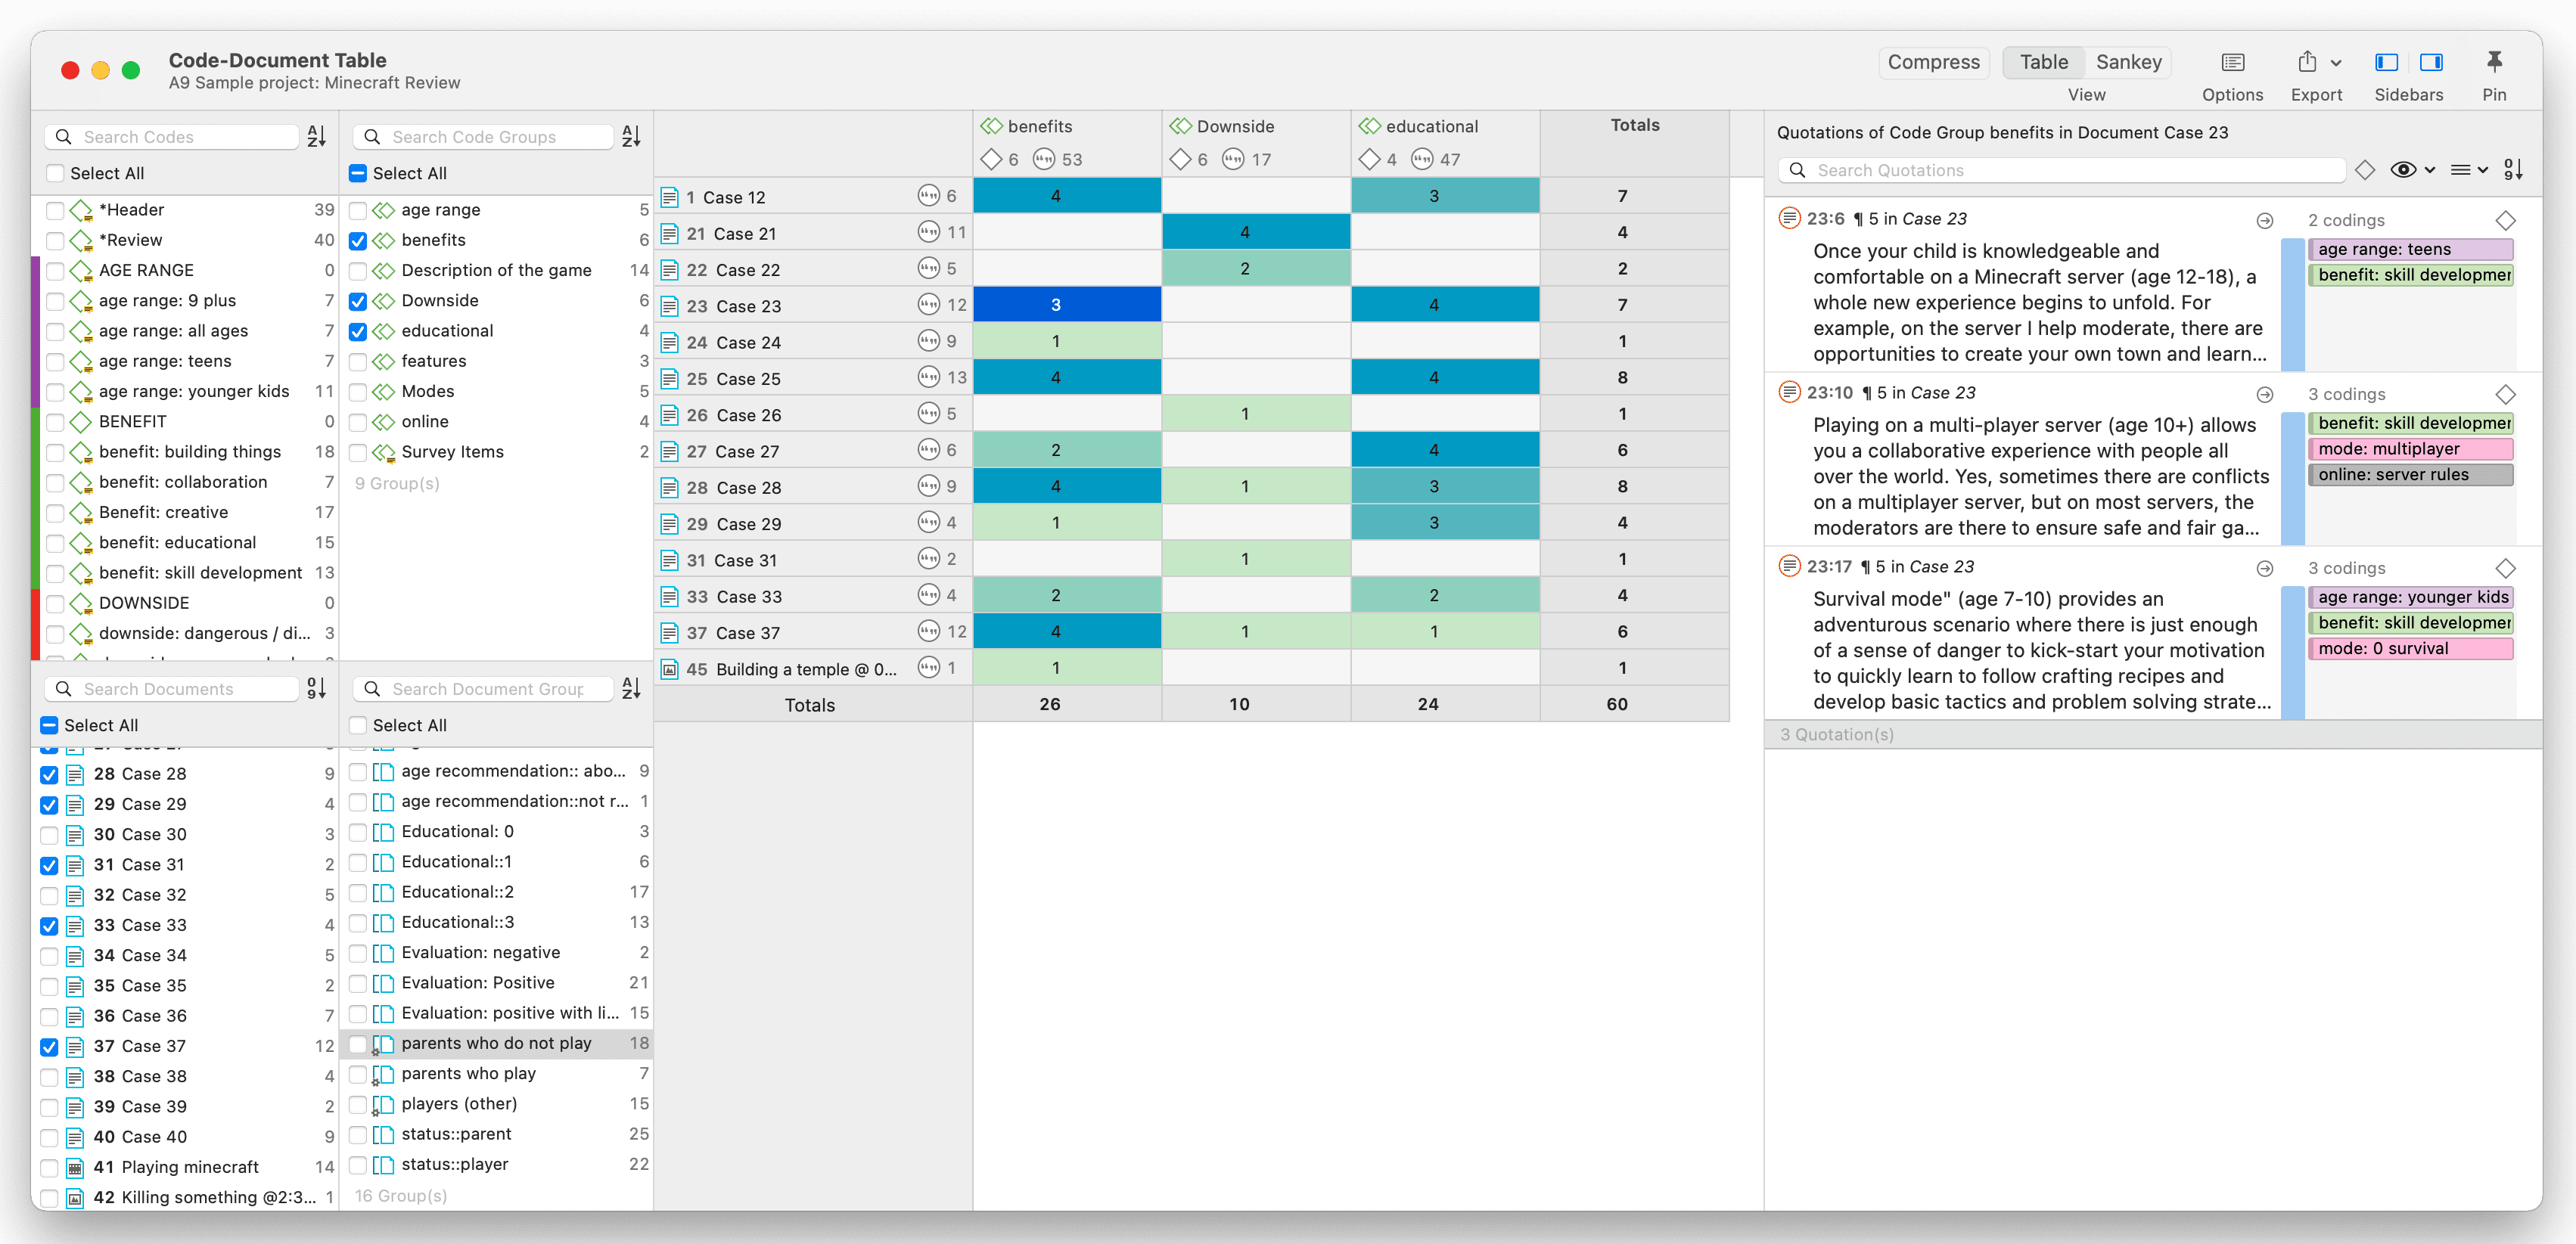 Example Code-Document Table